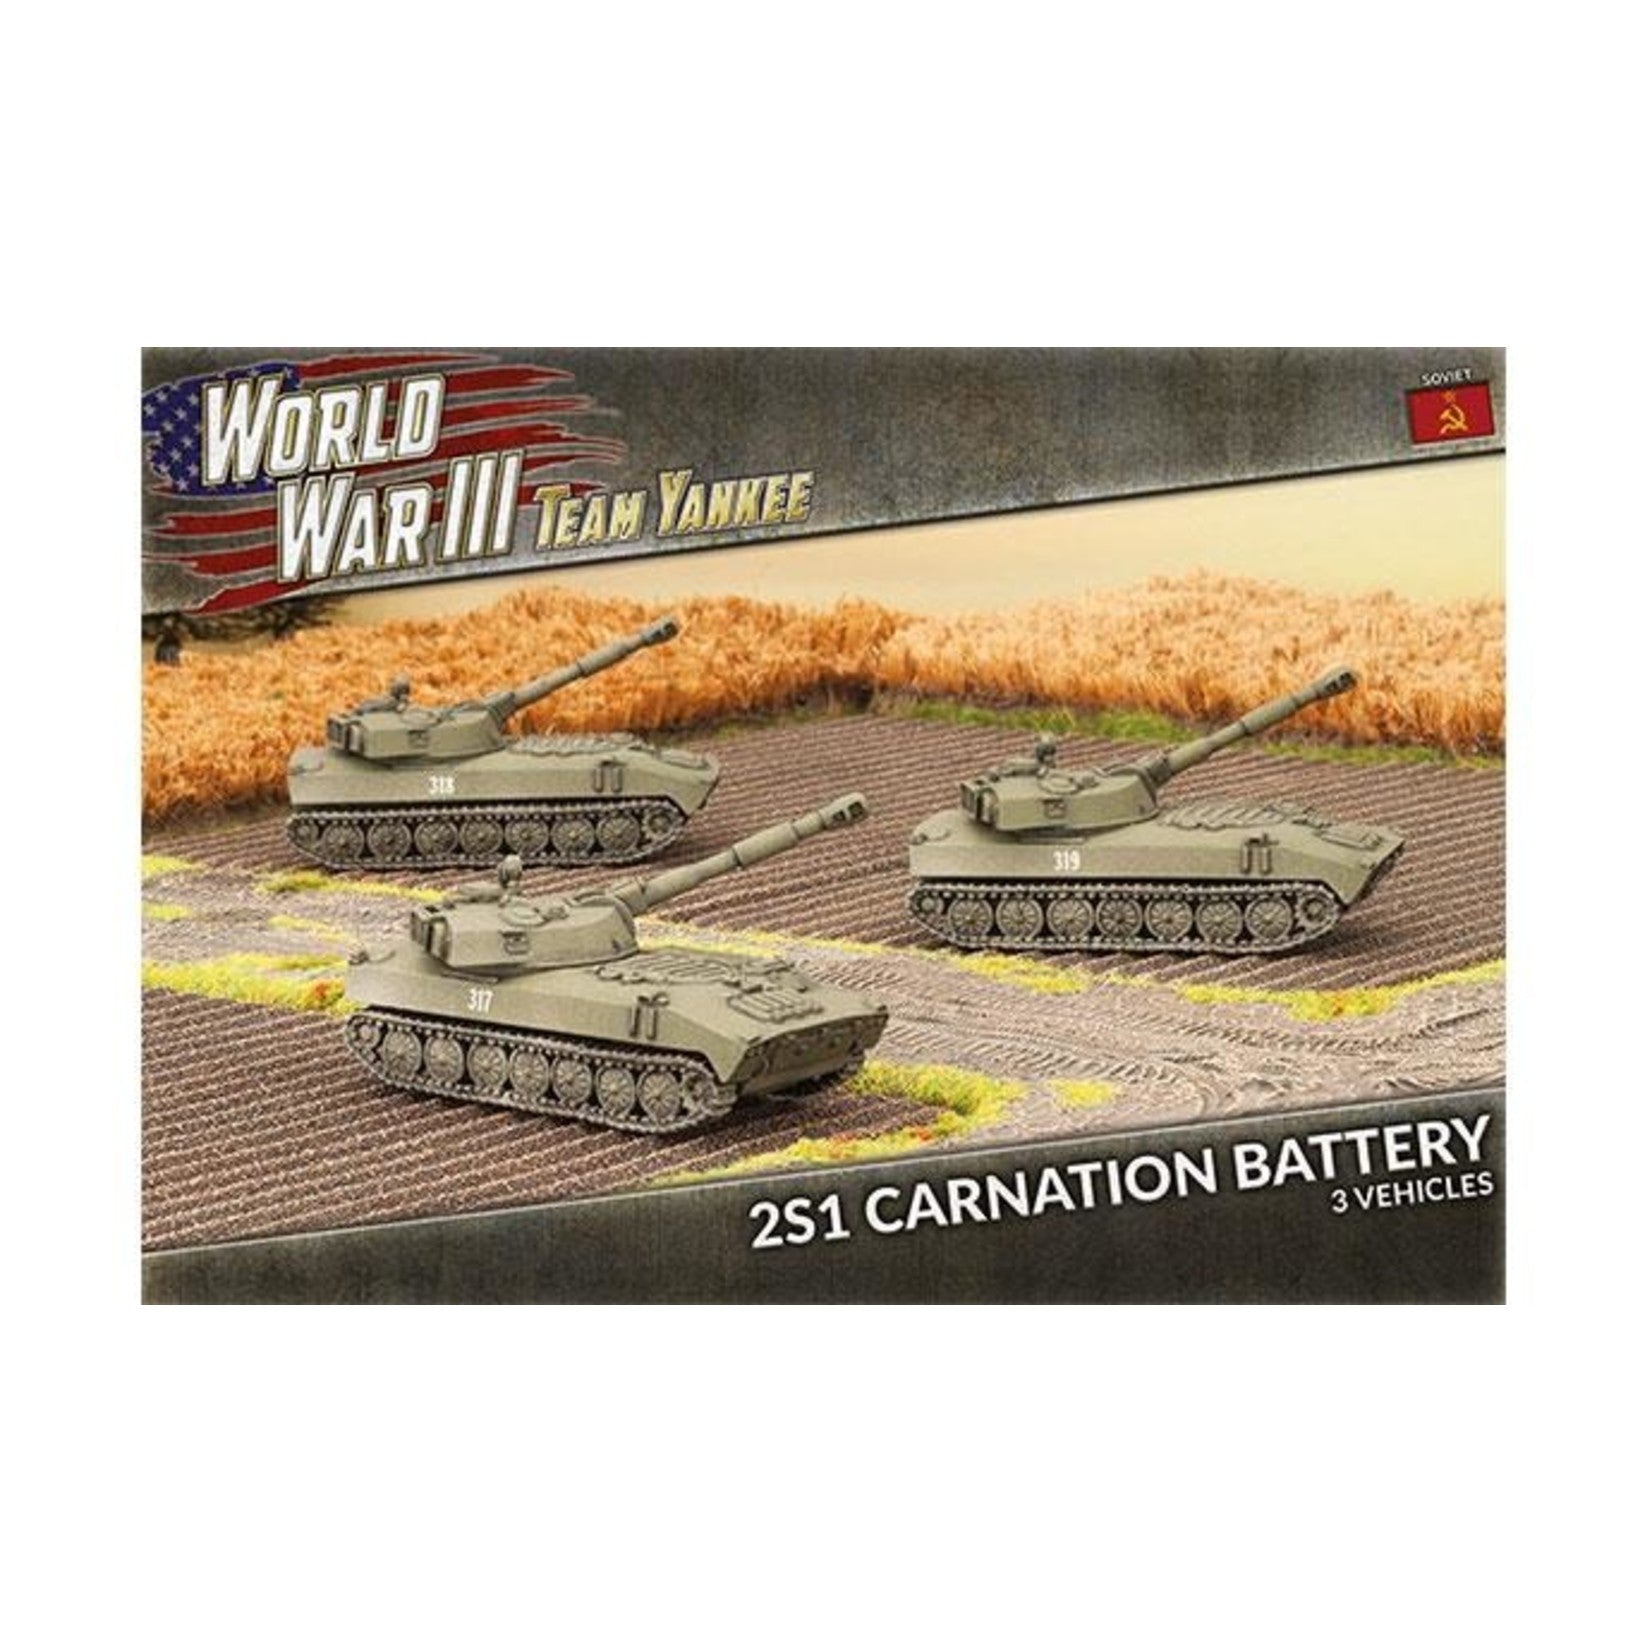 2S1 Carnation Battery (WWIII x3 Tanks)with three vehiclesRed Banner